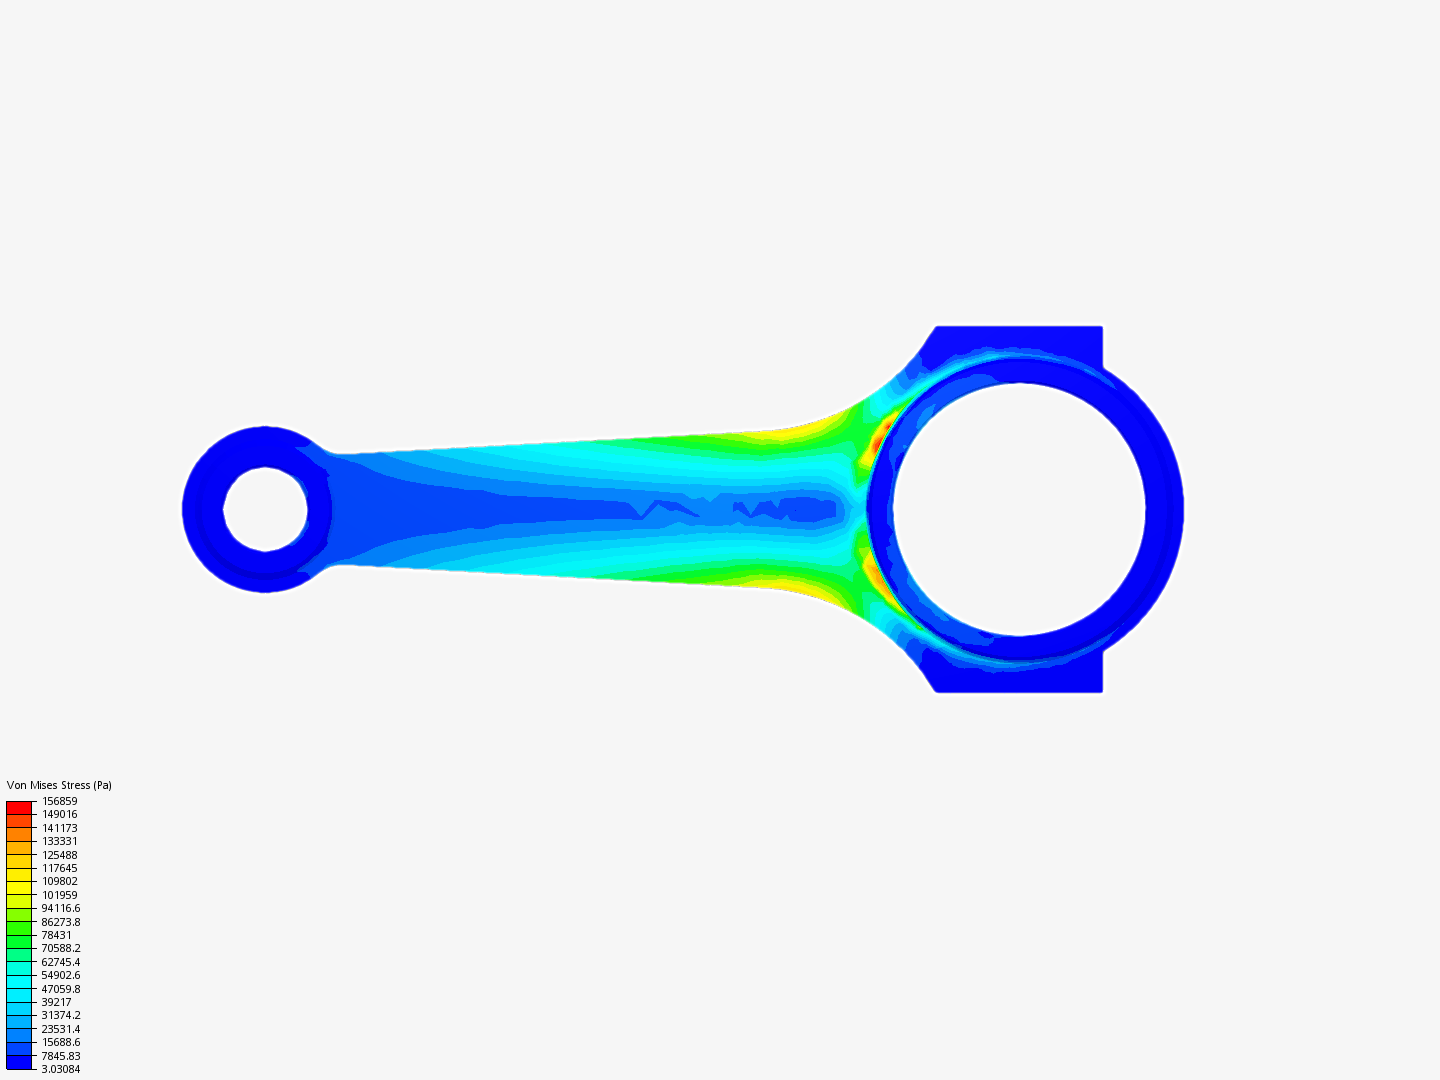 Tutorial 1: Connecting rod stress analysis - Copy image